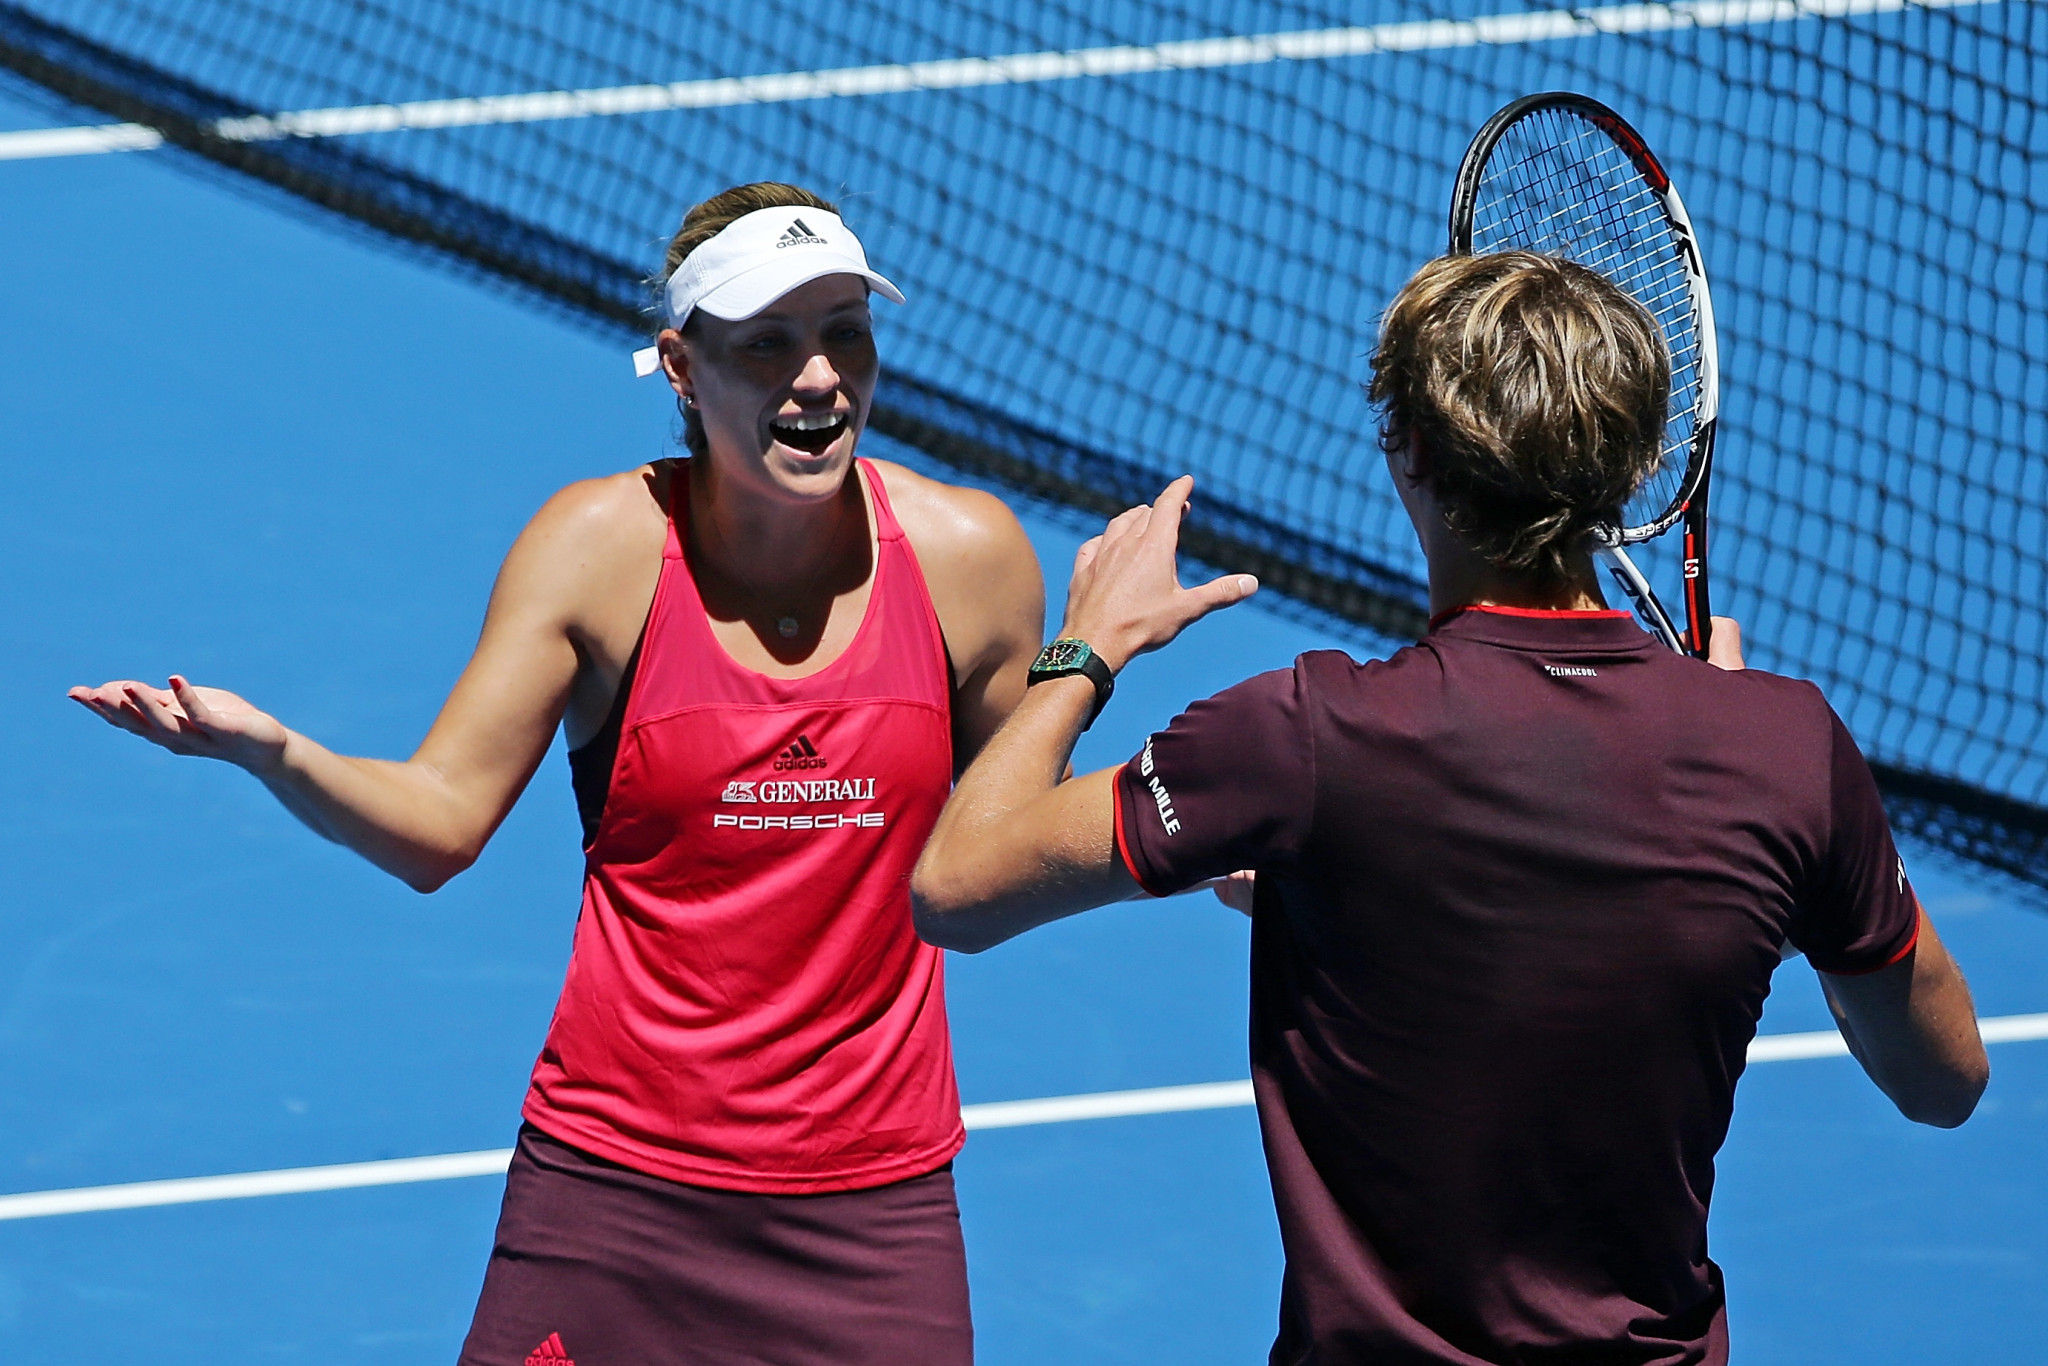 Germany continue good form at Hopman Cup